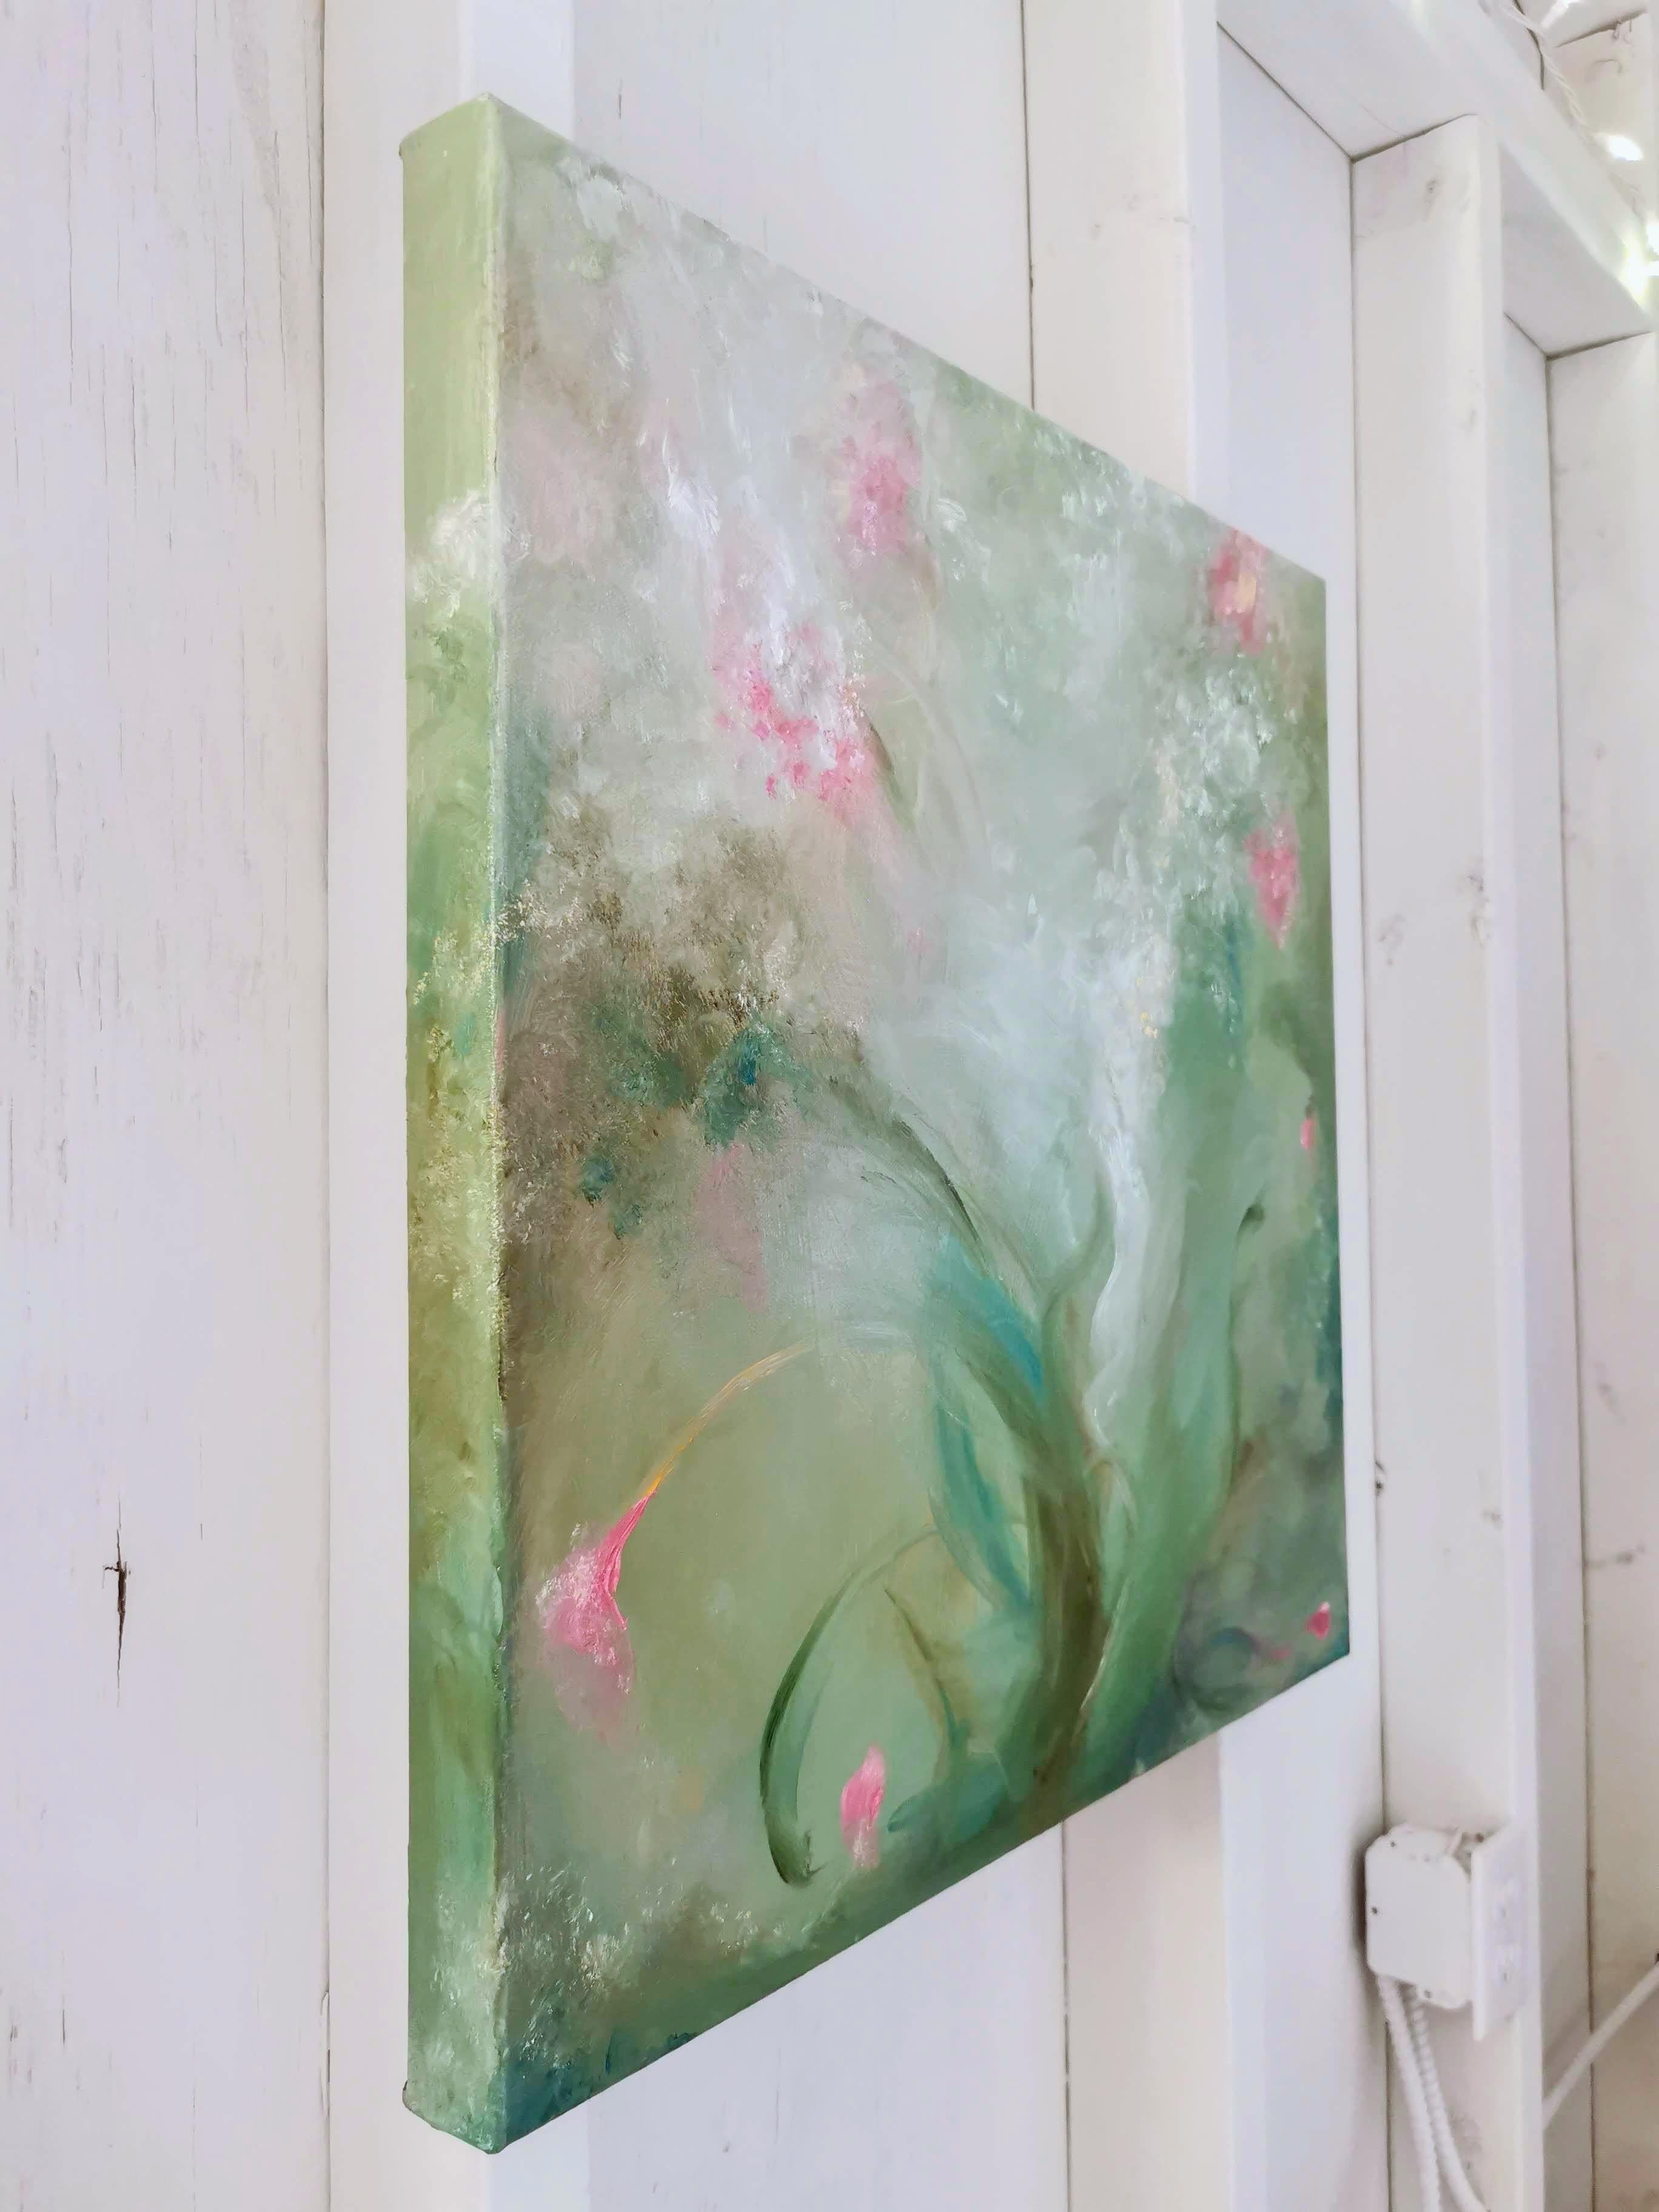 A most verdant spring - Whimsical green and pink abstract painting - Abstract Impressionist Painting by Jennifer L. Baker